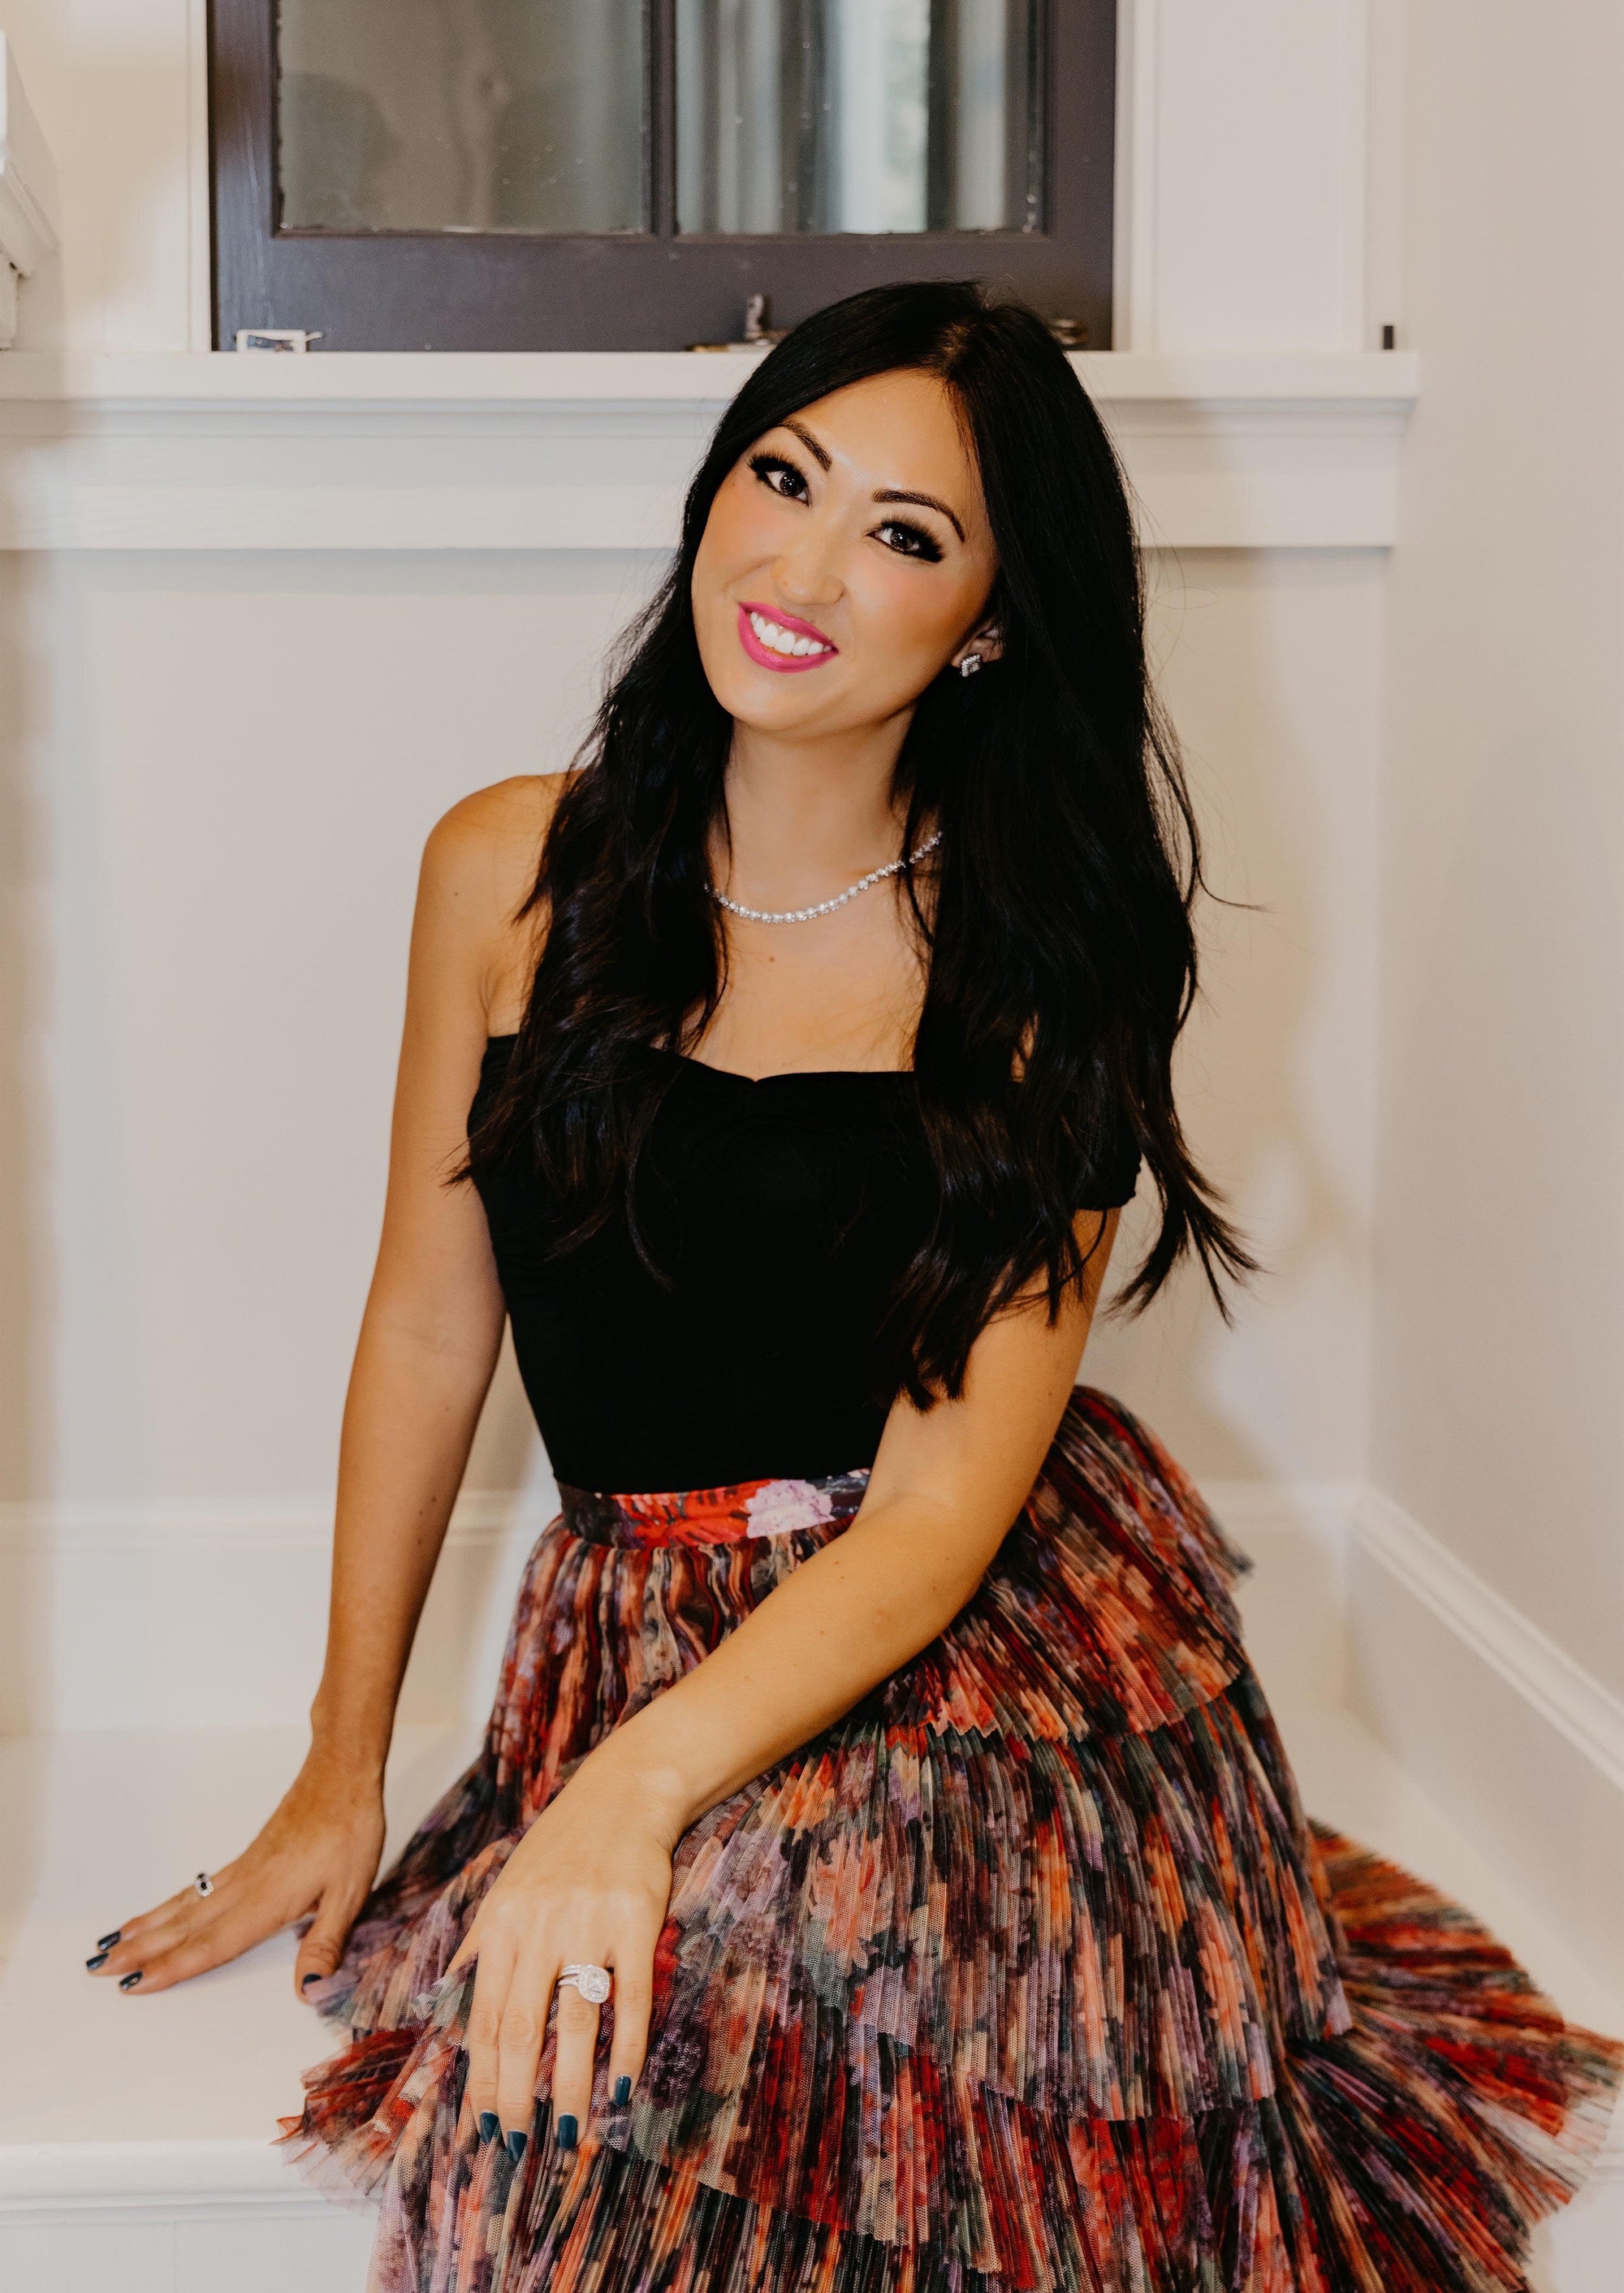 Turndown Service with Katelyn Ford-Bey - Executive Director & Co-Founder of Top Knotch Events